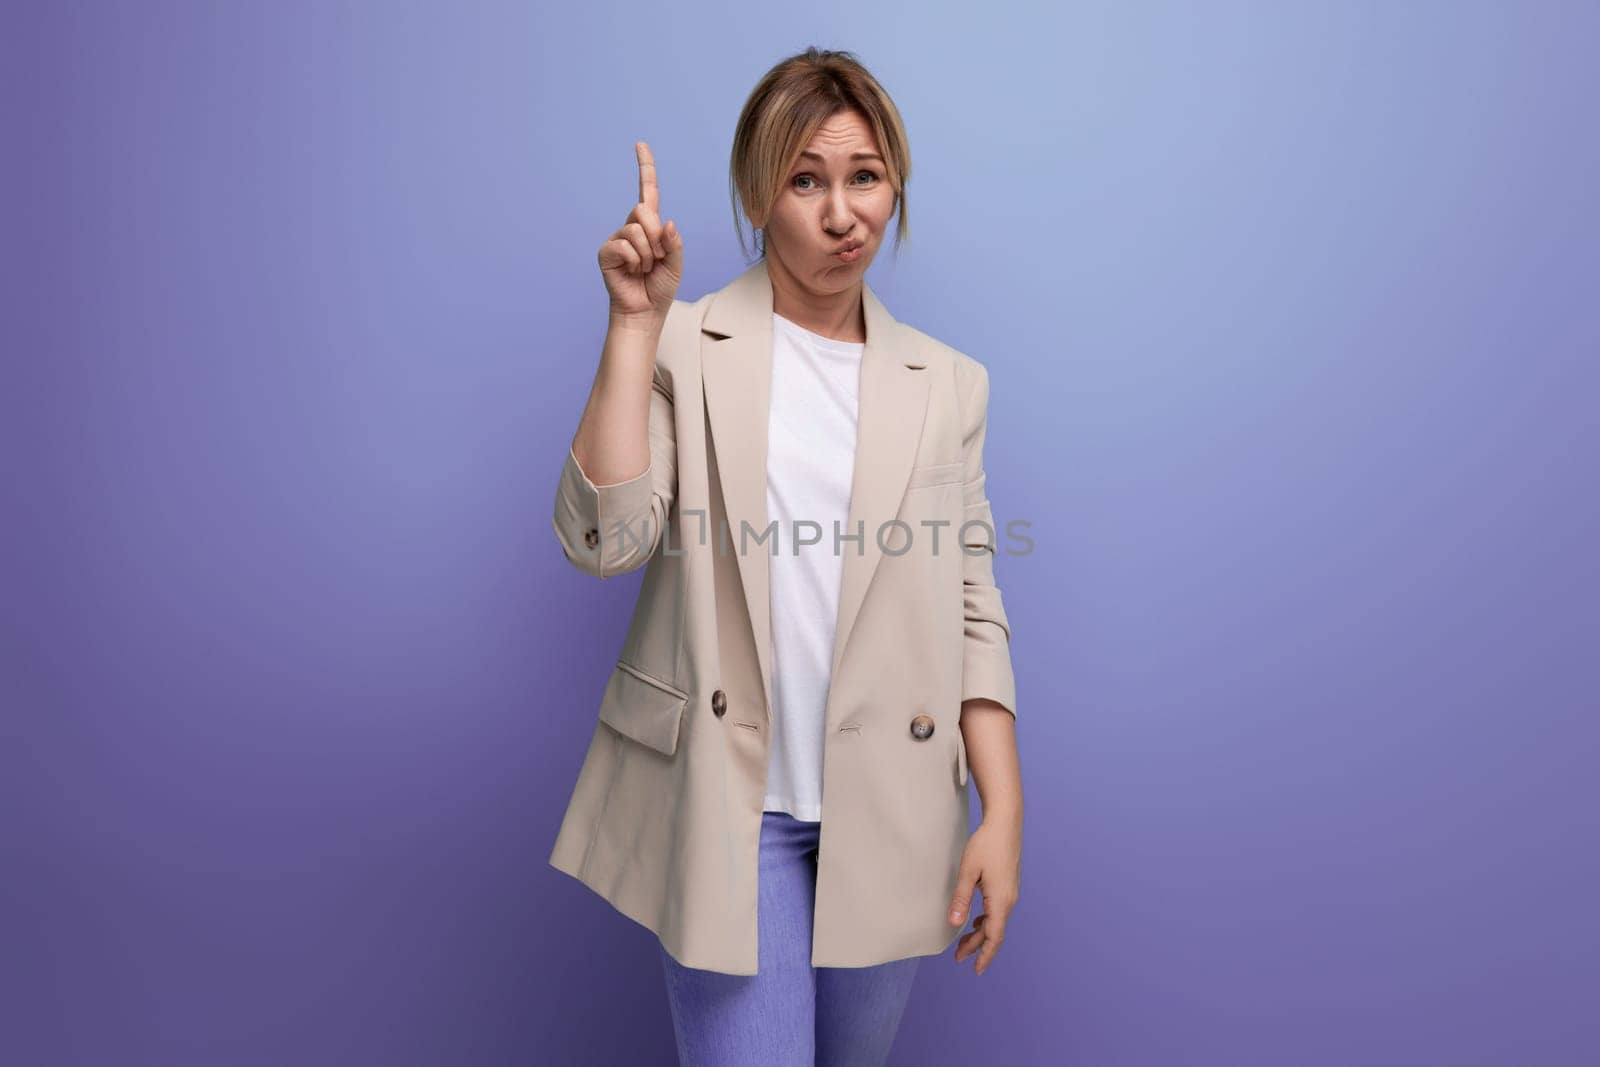 smart blond business young woman in jacket on studio background with copy space for advertising by TRMK